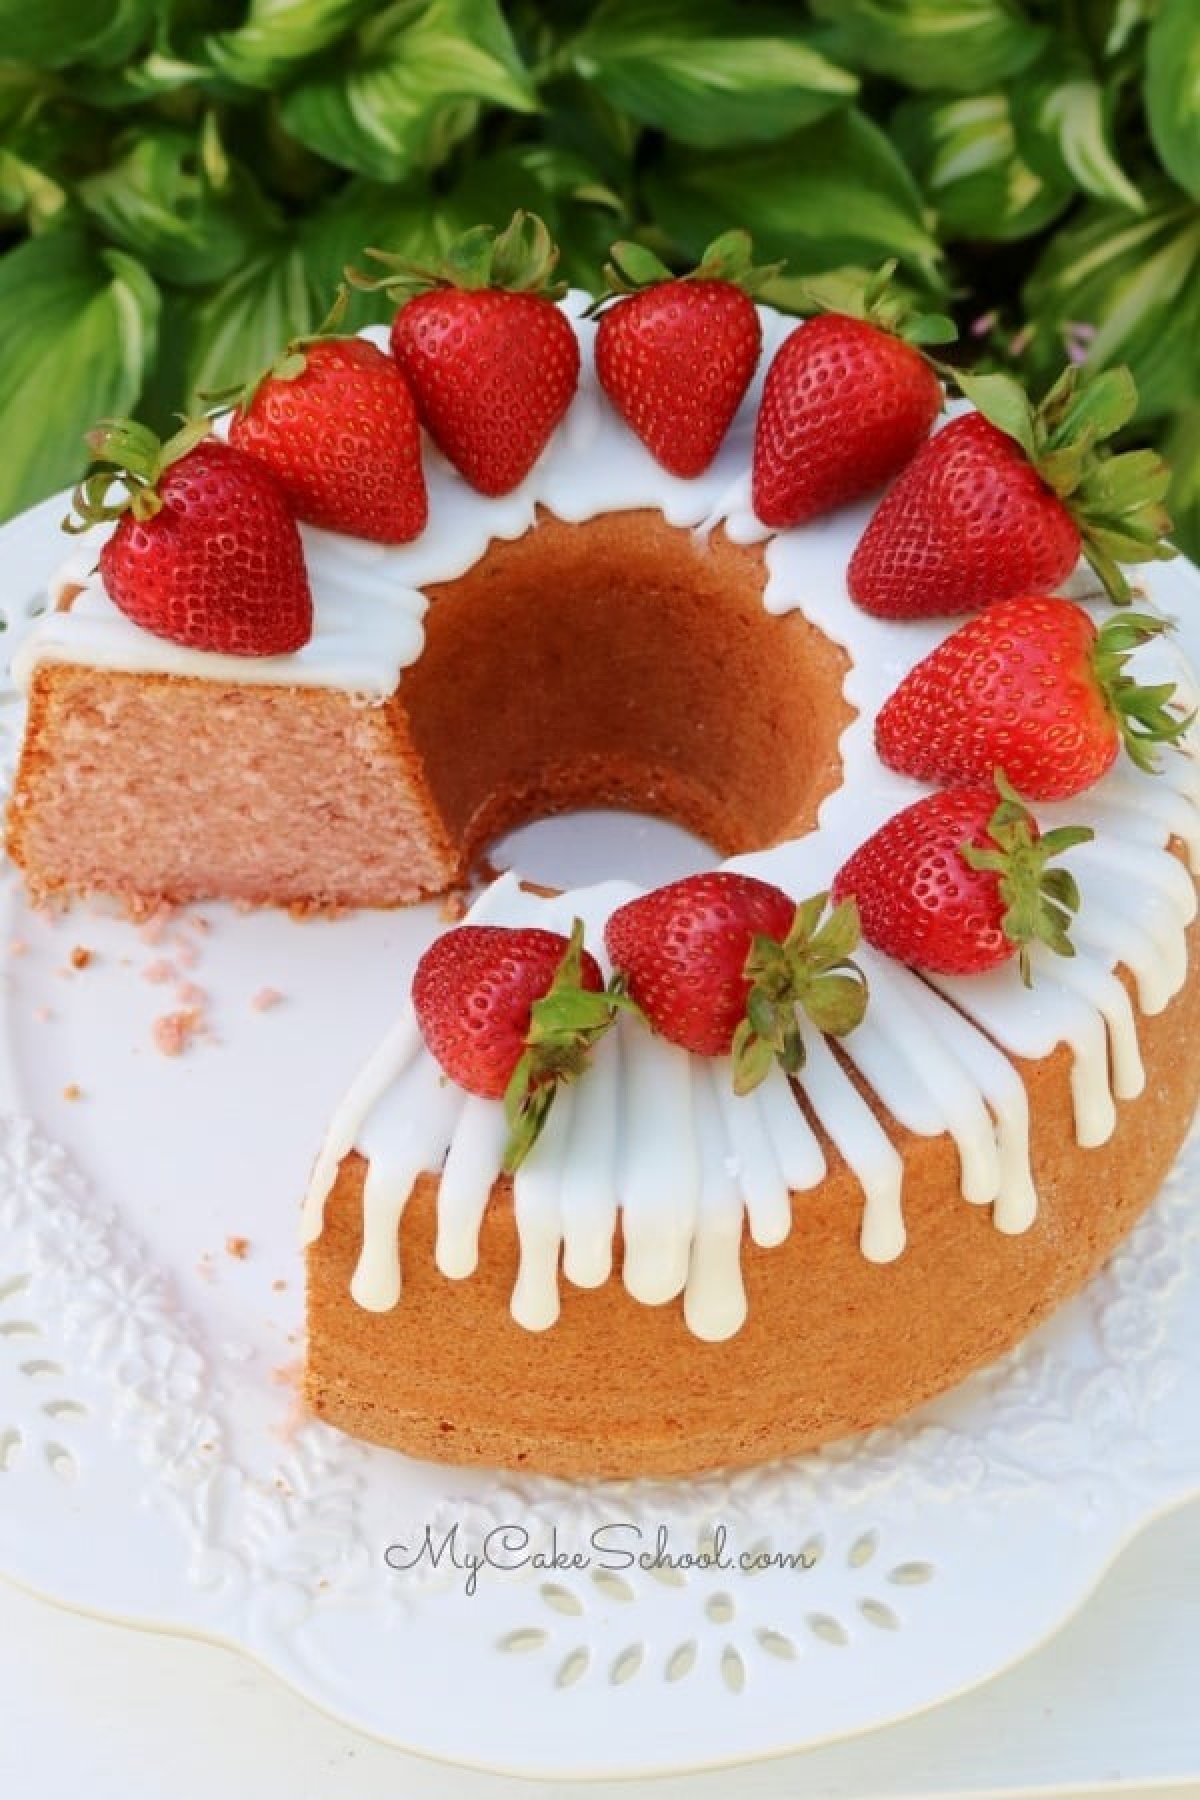 Sliced Strawberry Pound Cake, topped with fresh strawberries, on white pedestal.